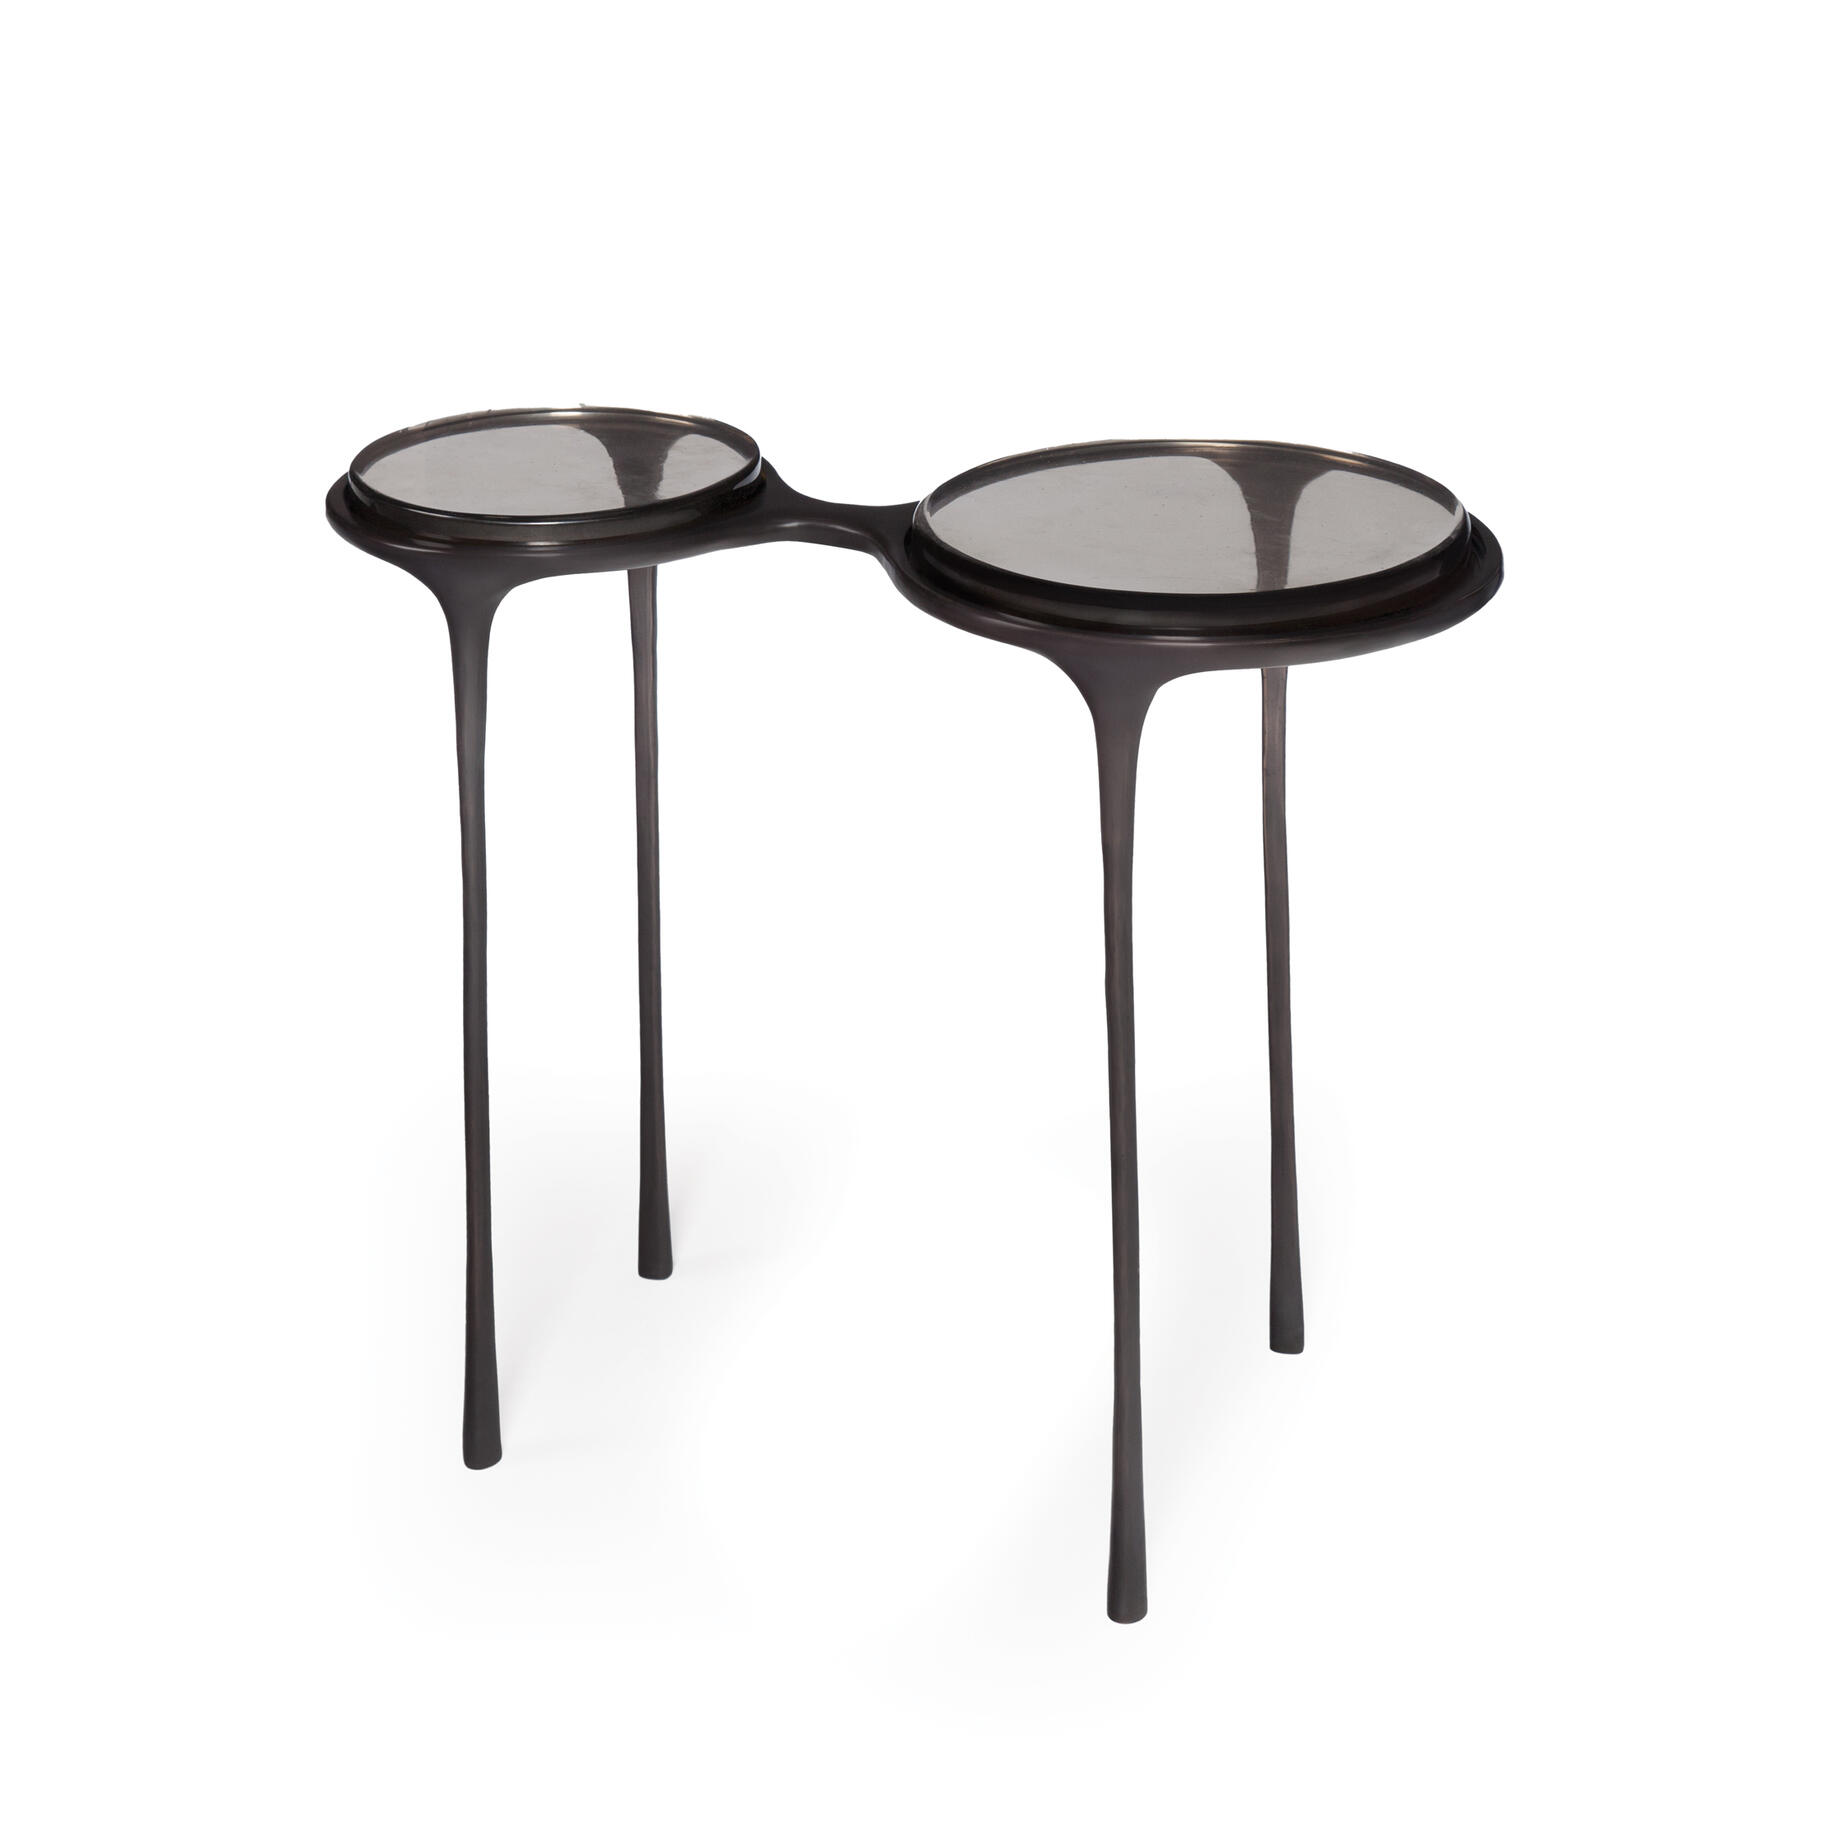 Spectacles Side Table